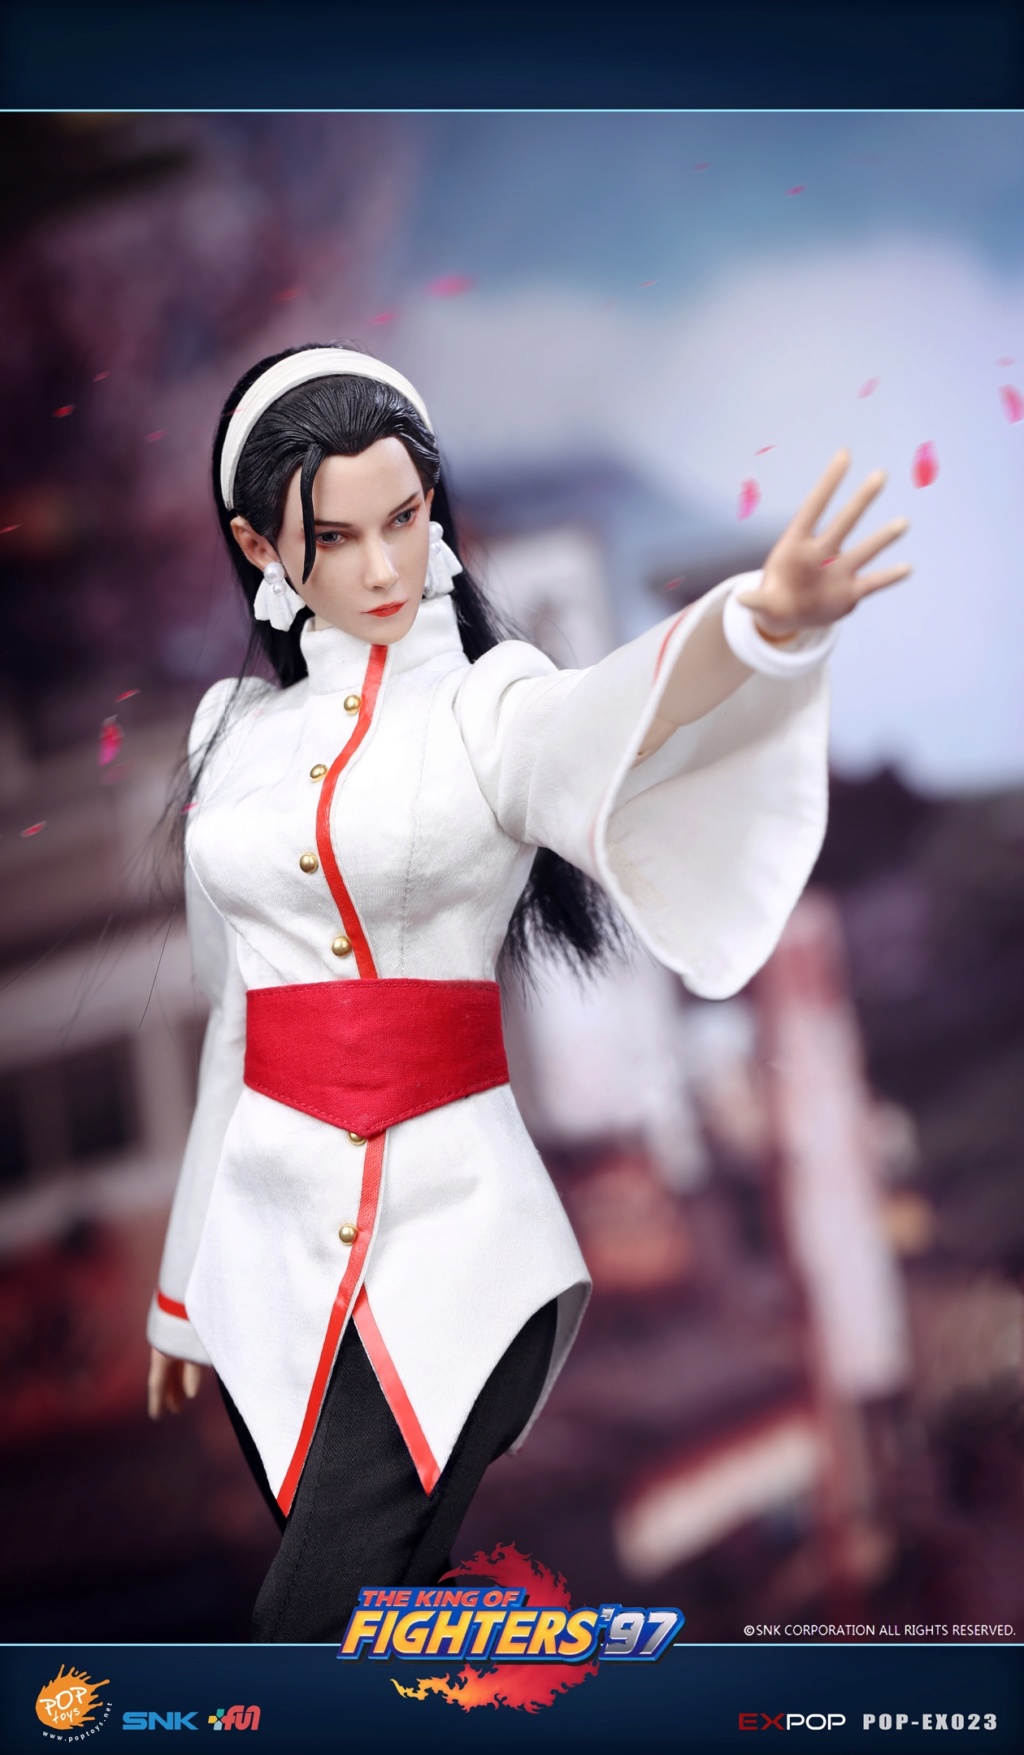 Videogame - NEW PRODUCT: POPTOYS: EX023 1/6 King of Fighters KOF97 - Kagura Thousand Cranes 12553310